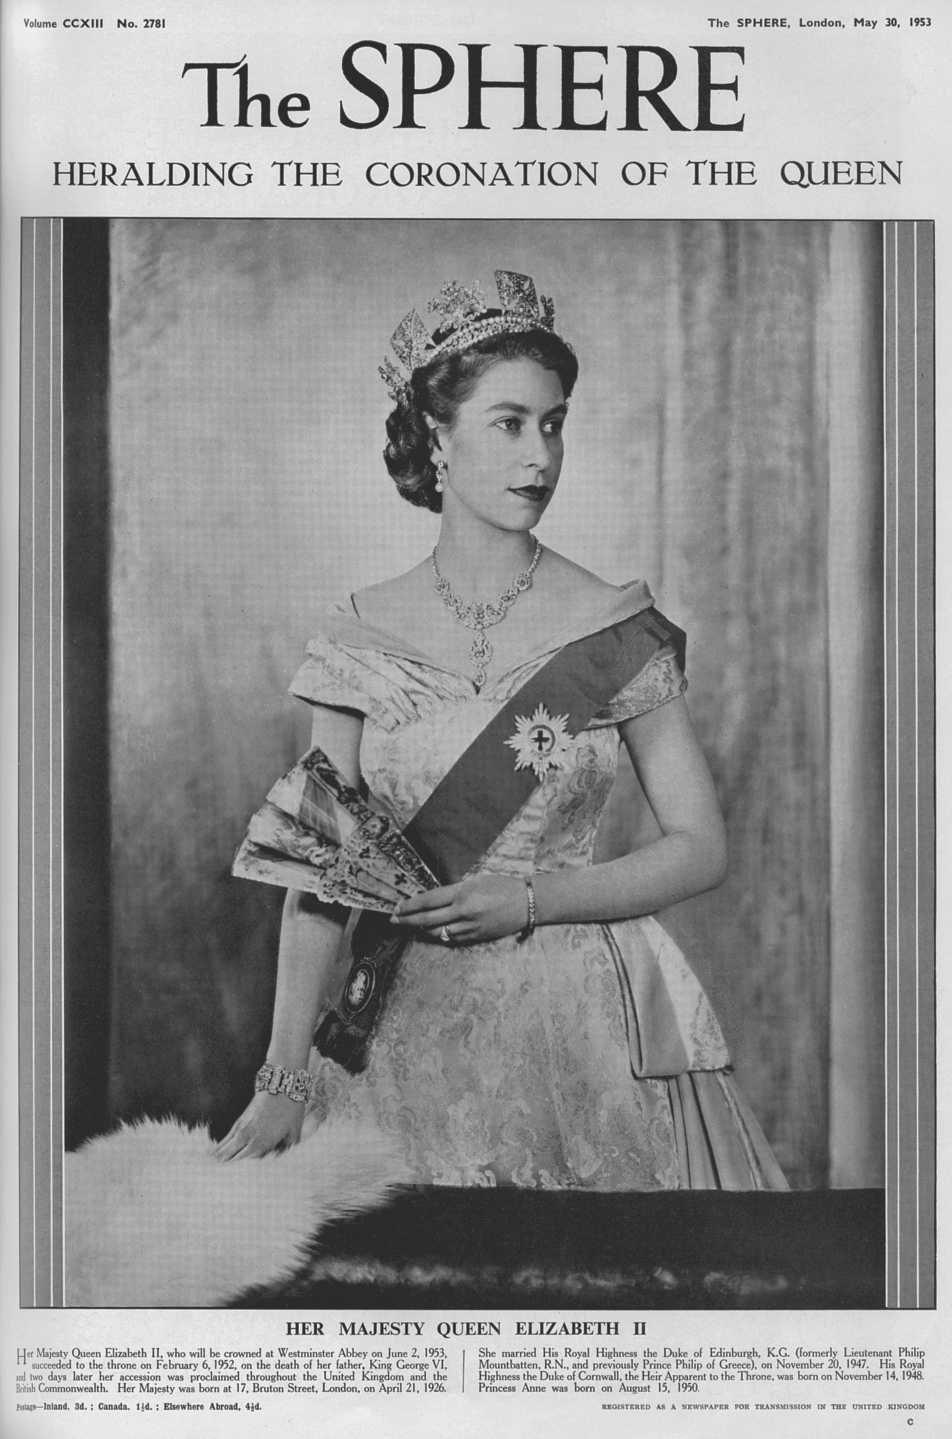 The Queen on the cover of The SPHERE in May 1953